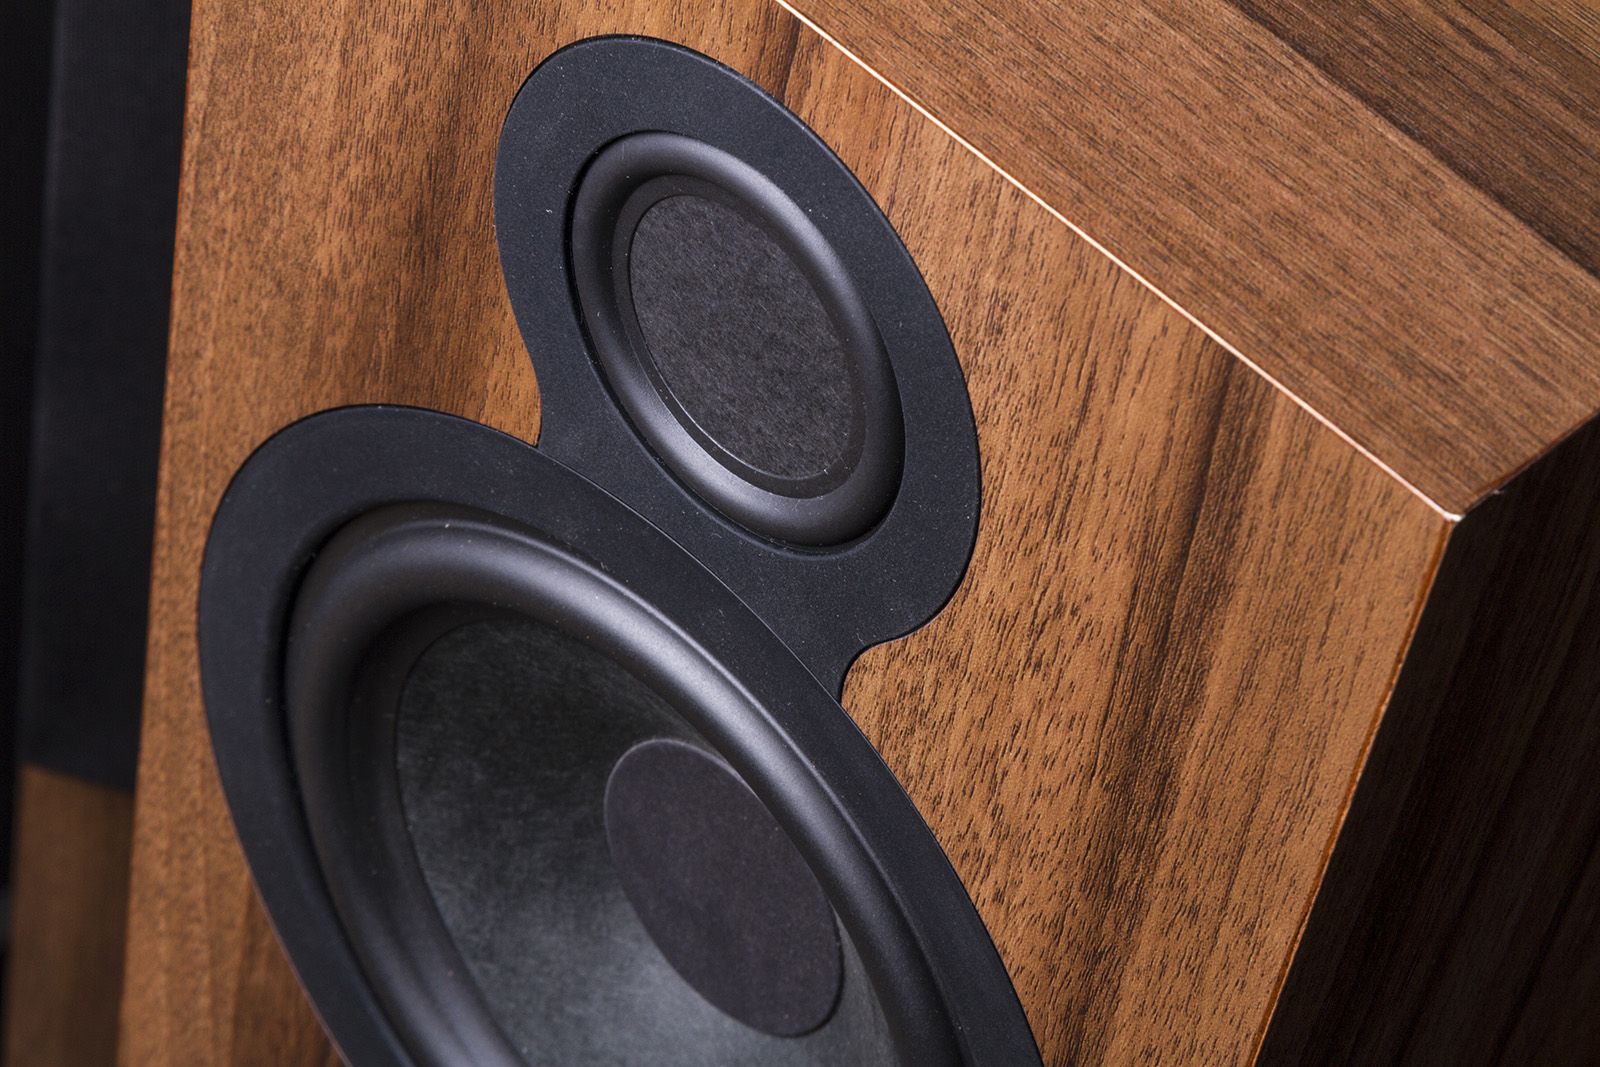 quality of sound and the tech behind it what to look for when choosing a speaker image 1